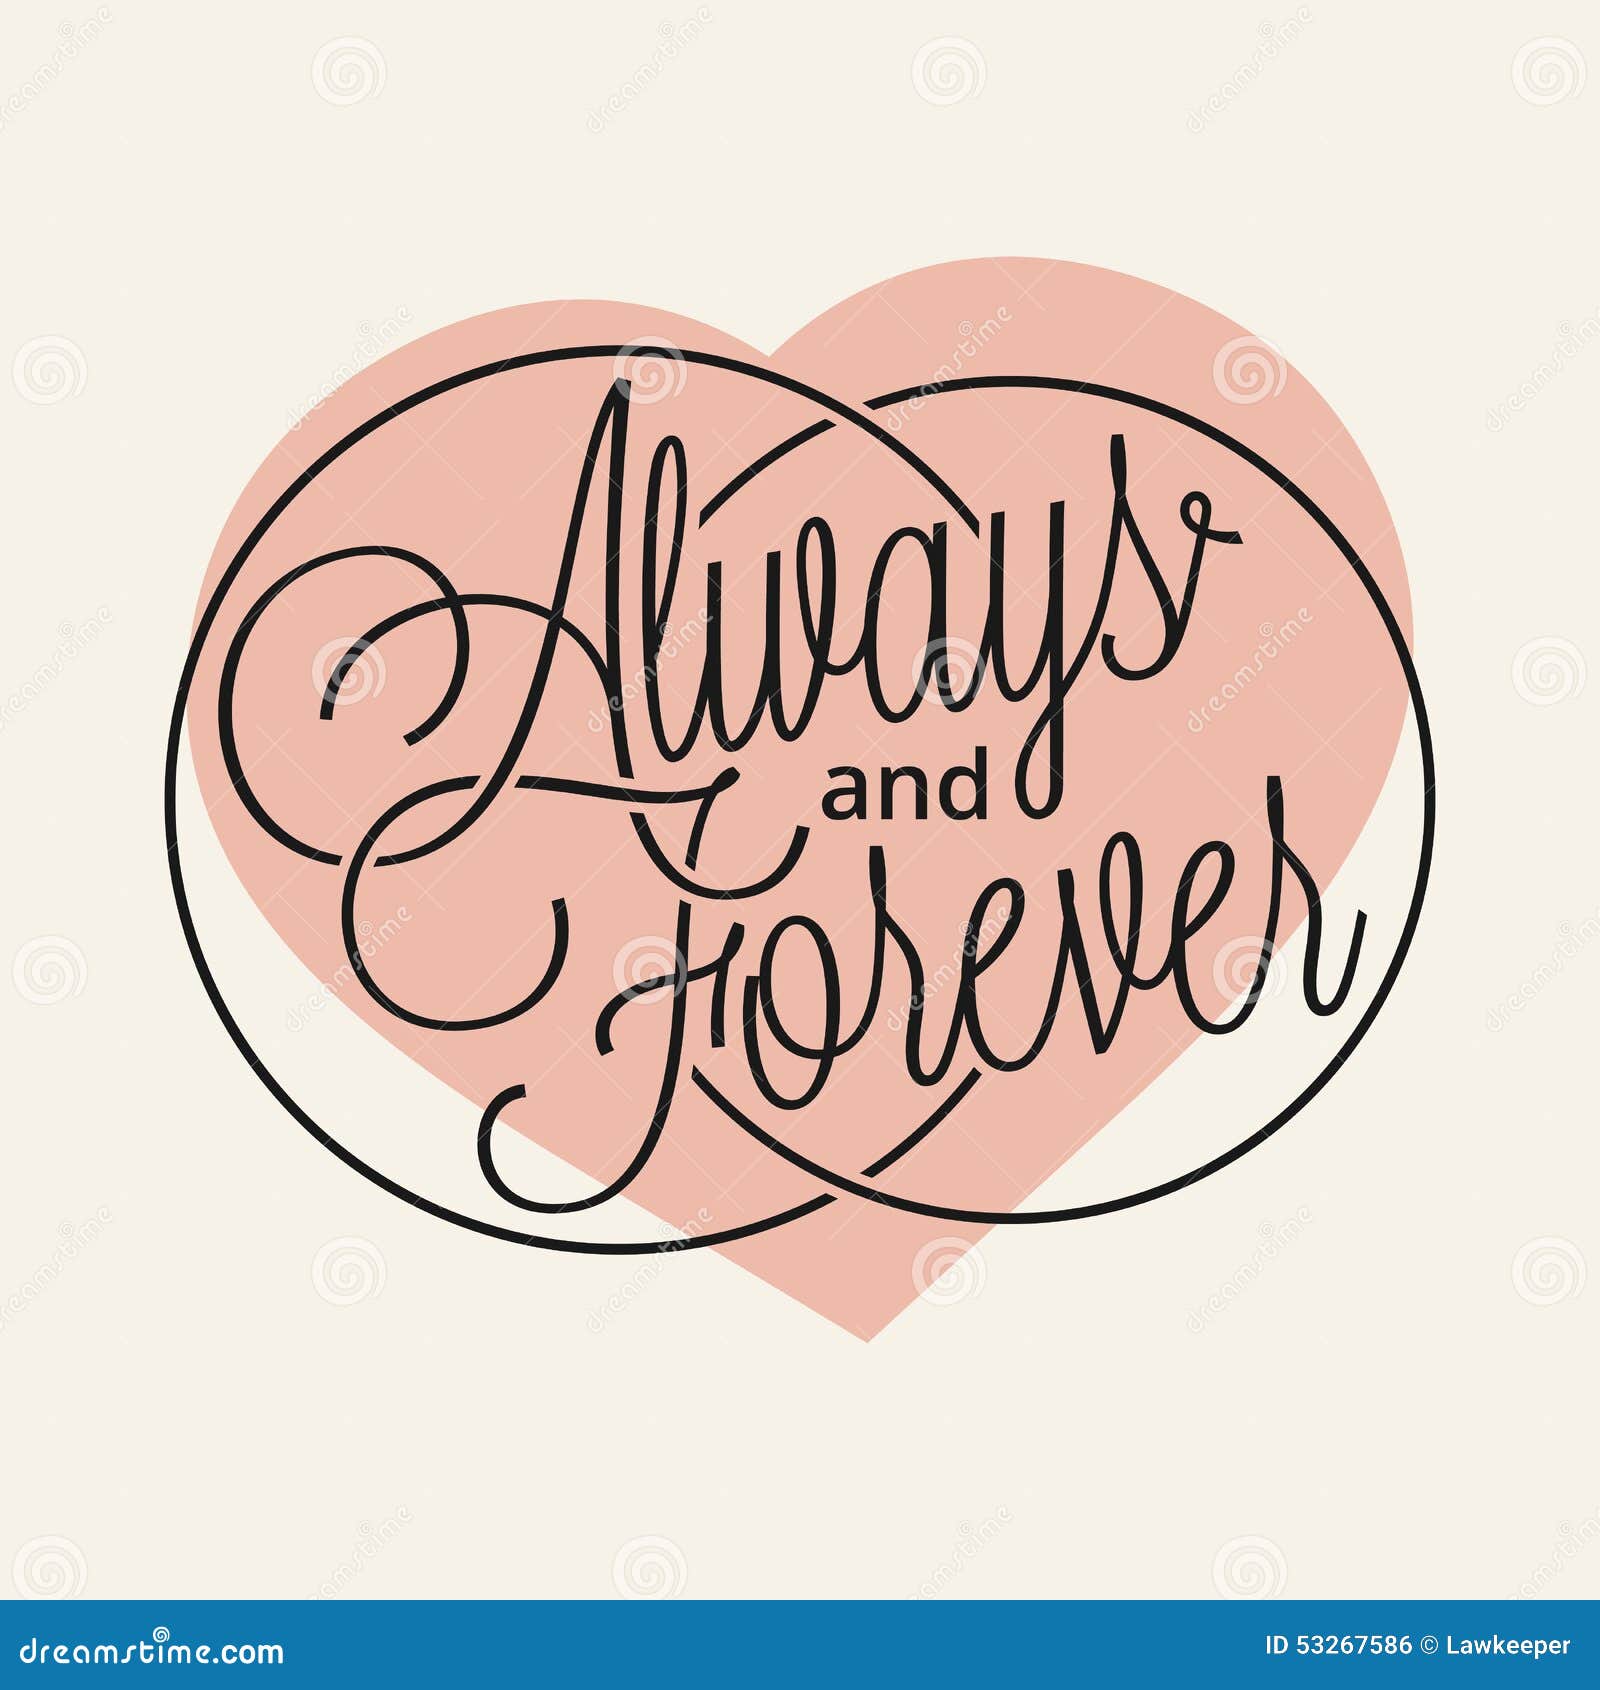 always and forever